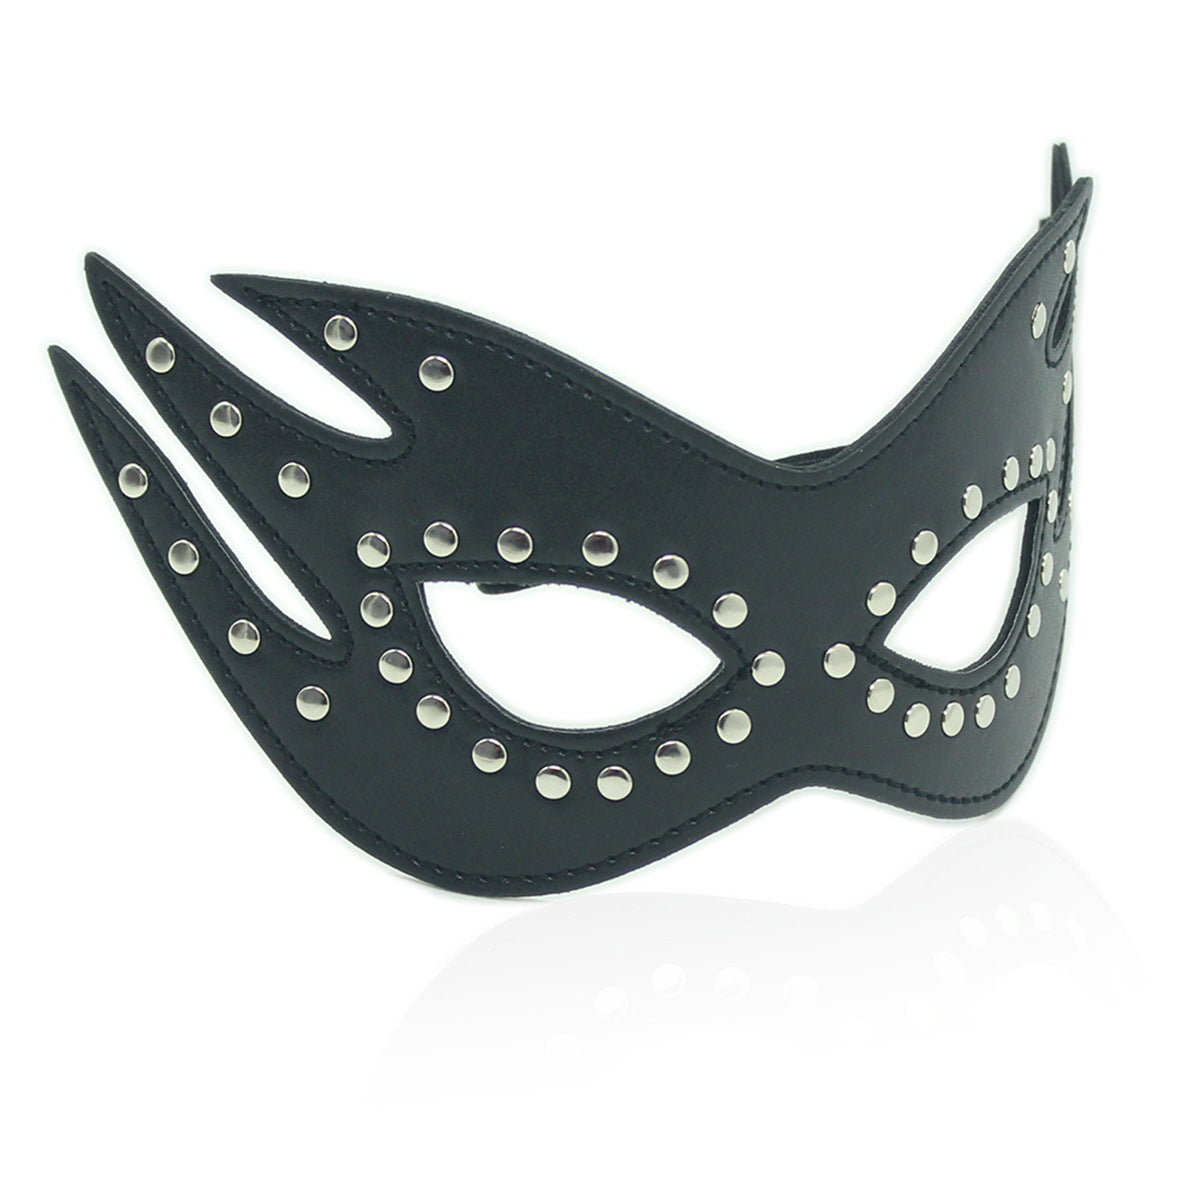 Fiery Design Faux Leather Comfortable Masquerade Mask With Elastic Band